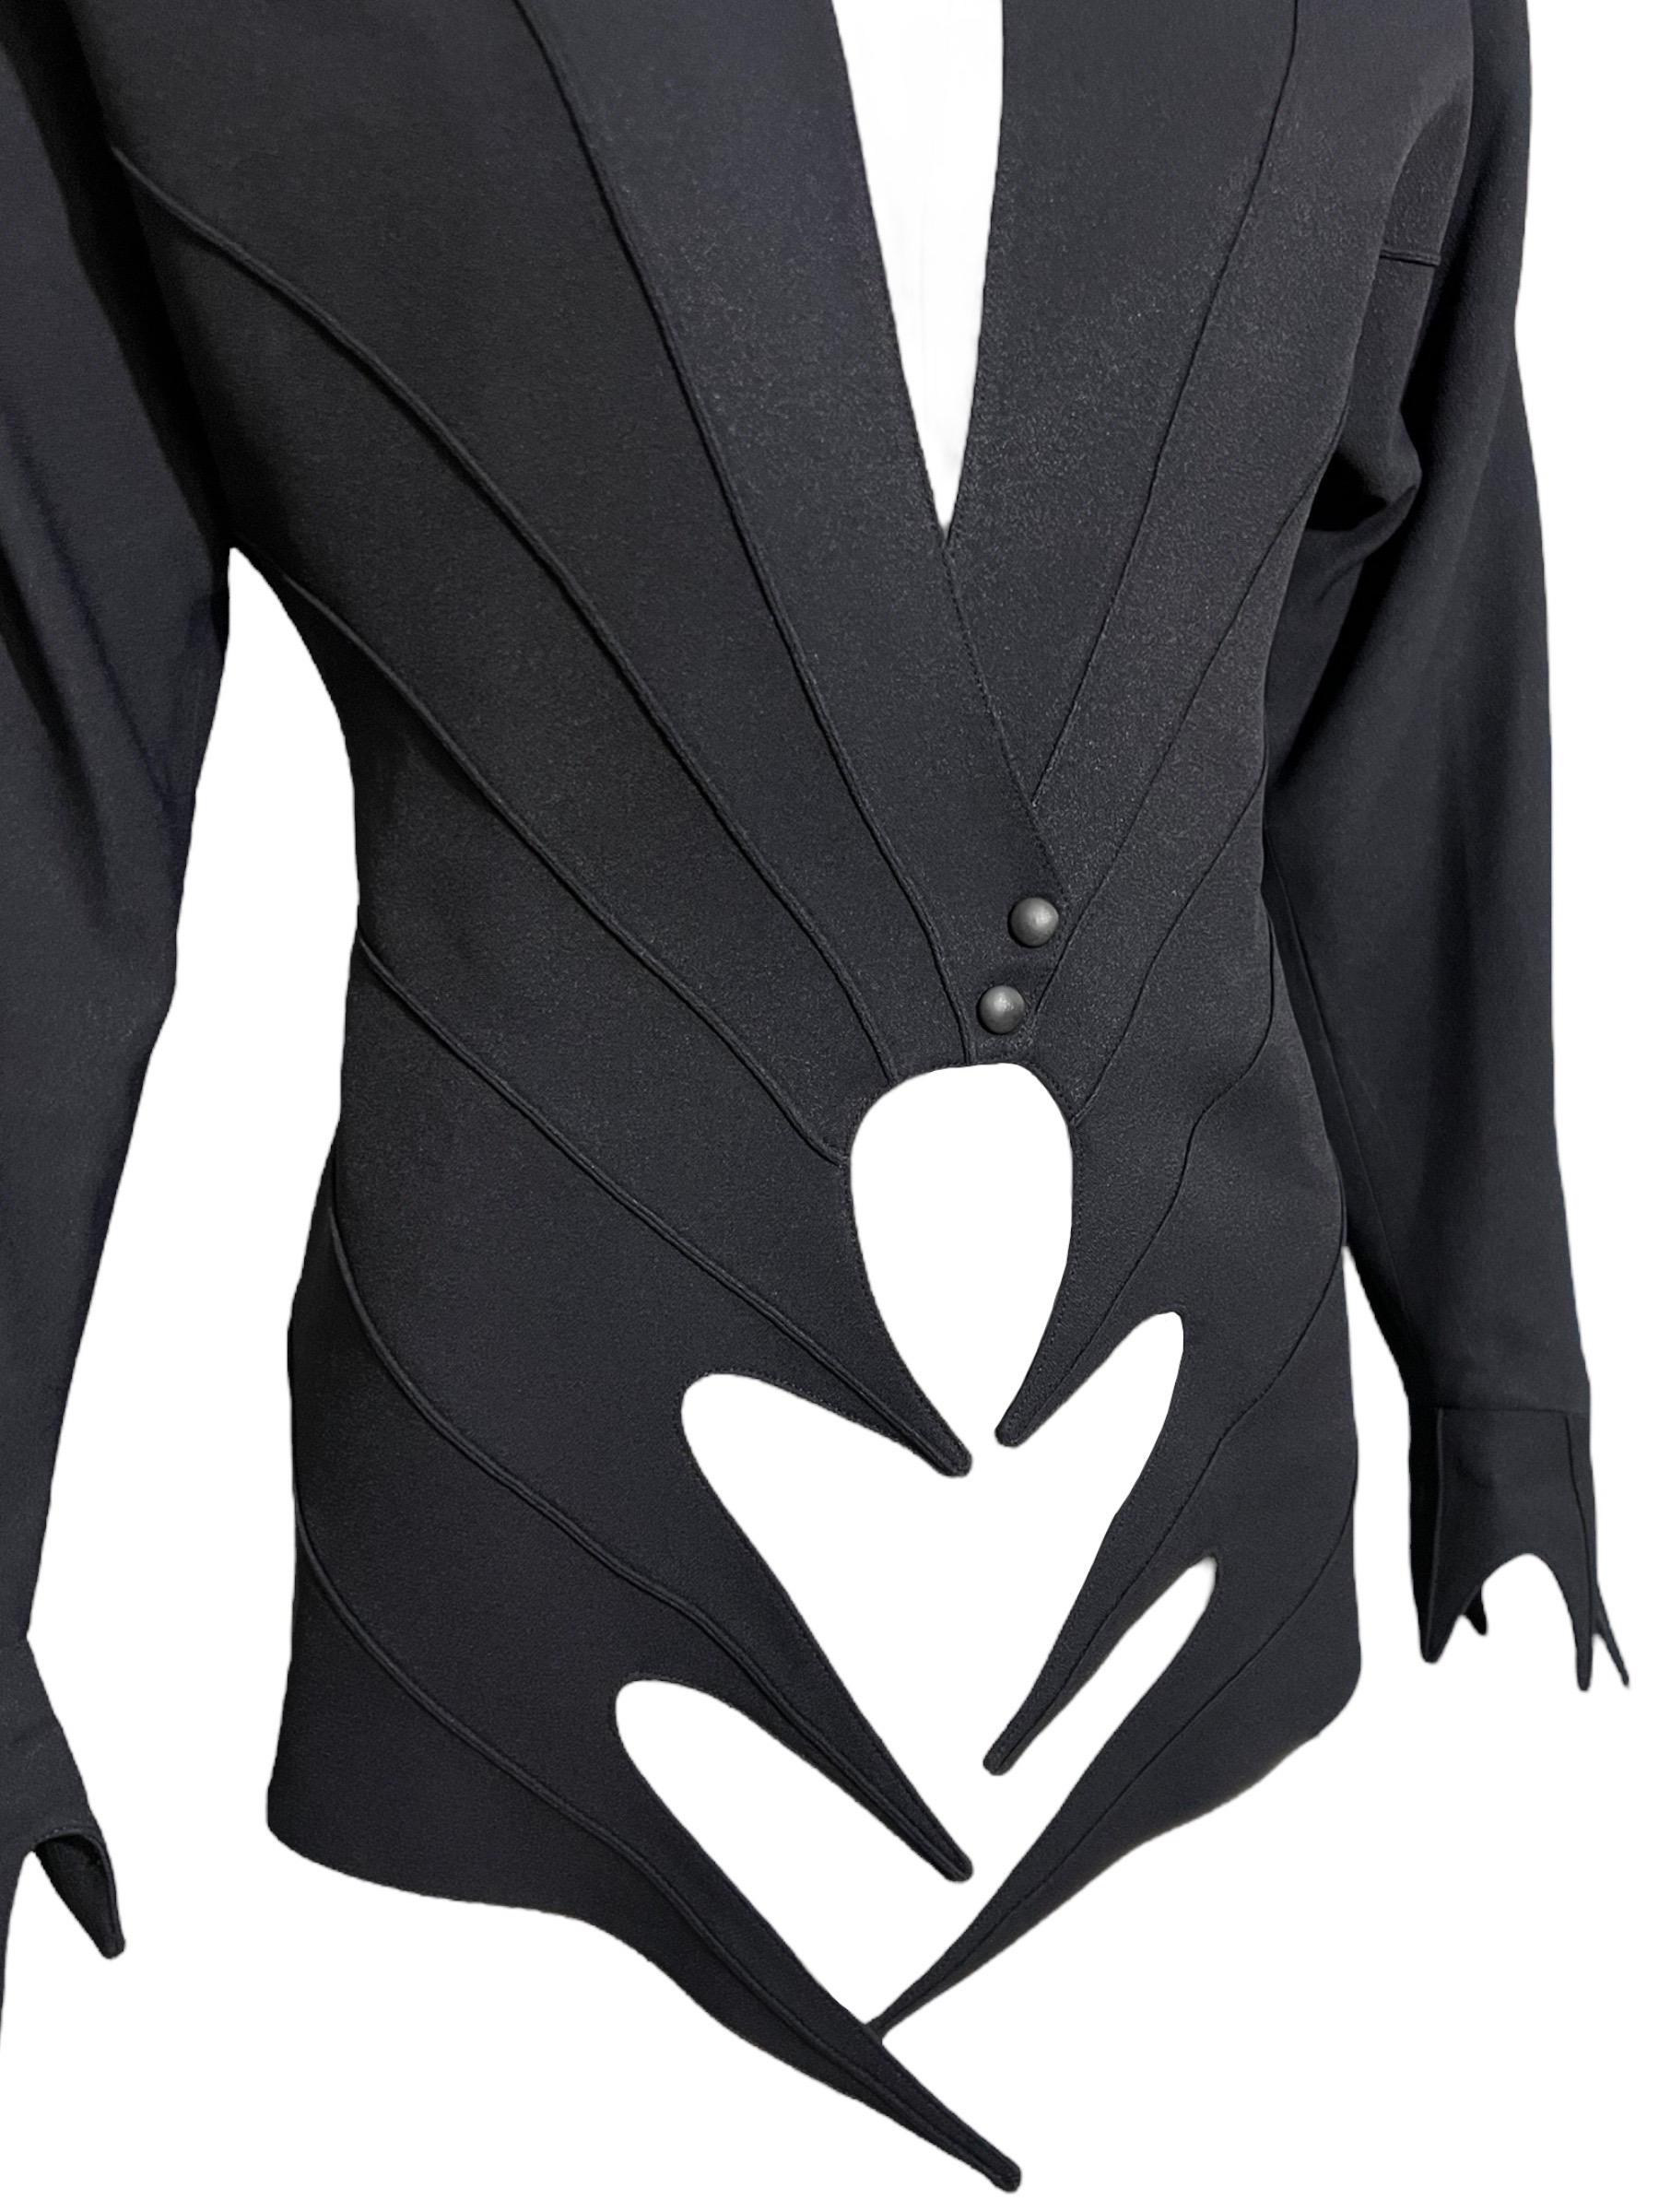 S/S 1989 Thierry Mugler Runway Sculptural Black Pointed Cutout Jacket  For Sale 4